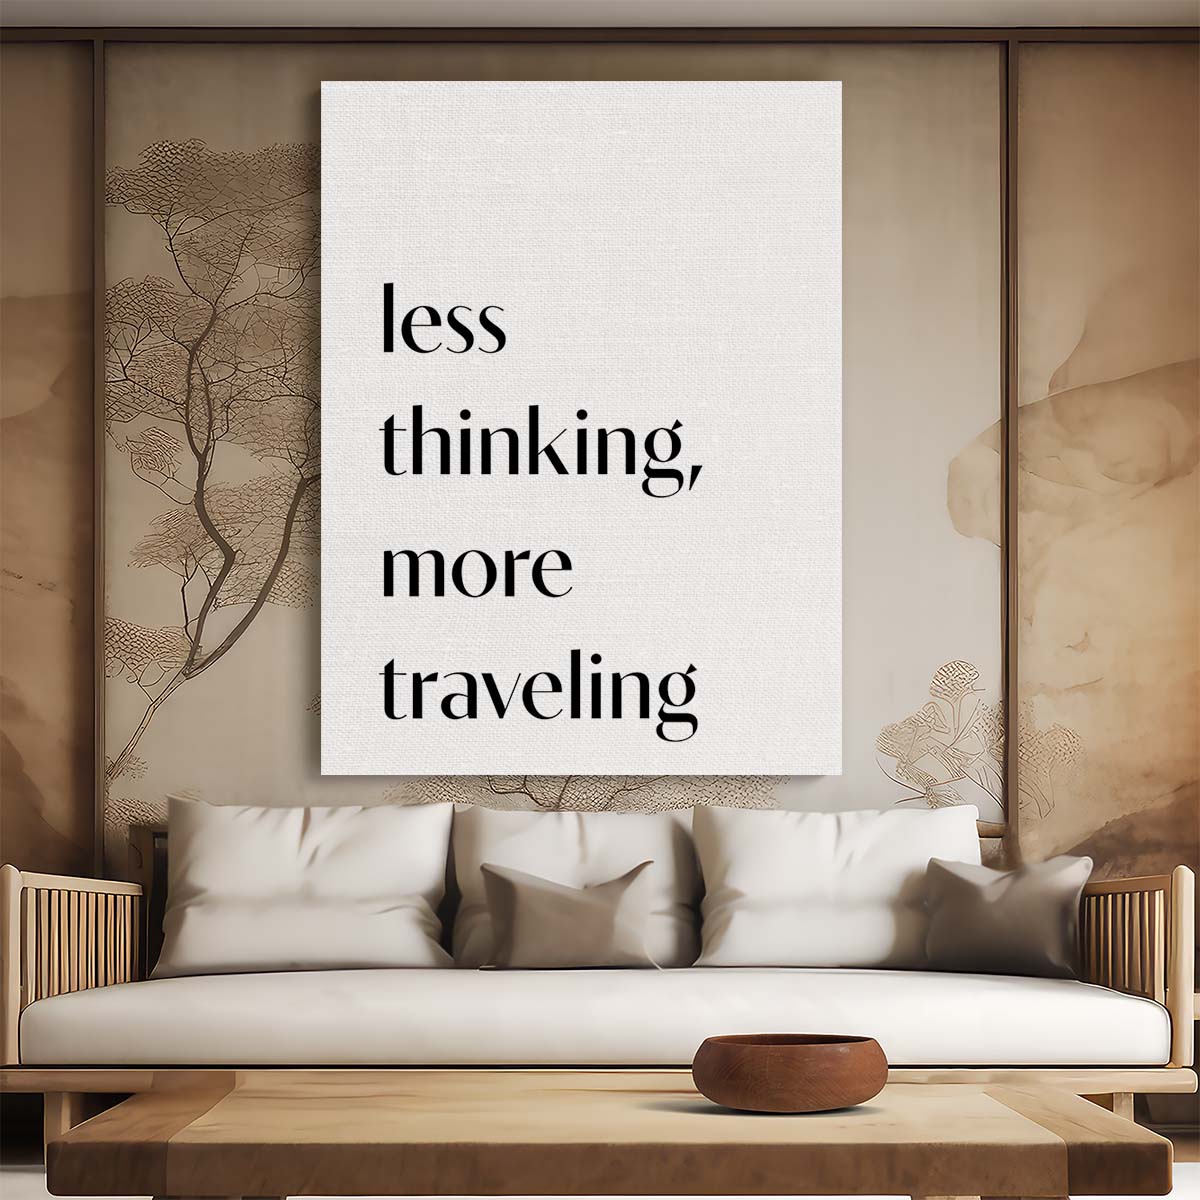 Black & White Travel Typography Illustration - Motivational Quote Art by Luxuriance Designs, made in USA